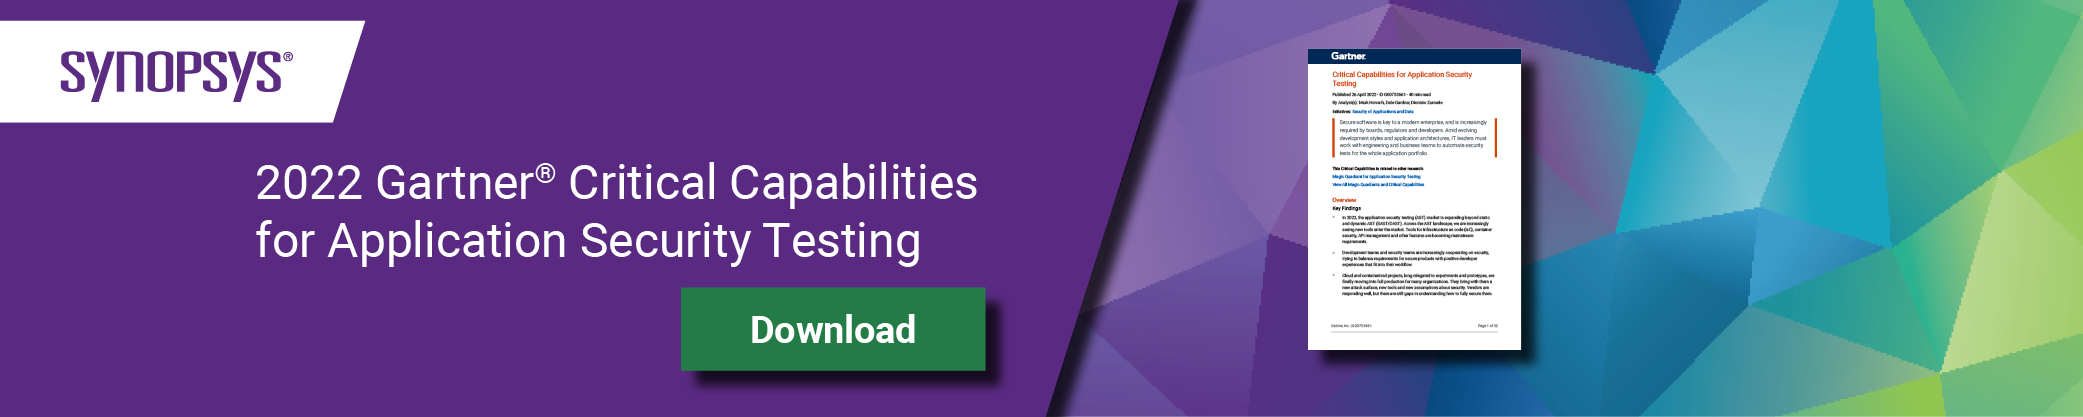 Download 2022 Gartner Critical Capabilities for Application Security Testing report | Synopsys